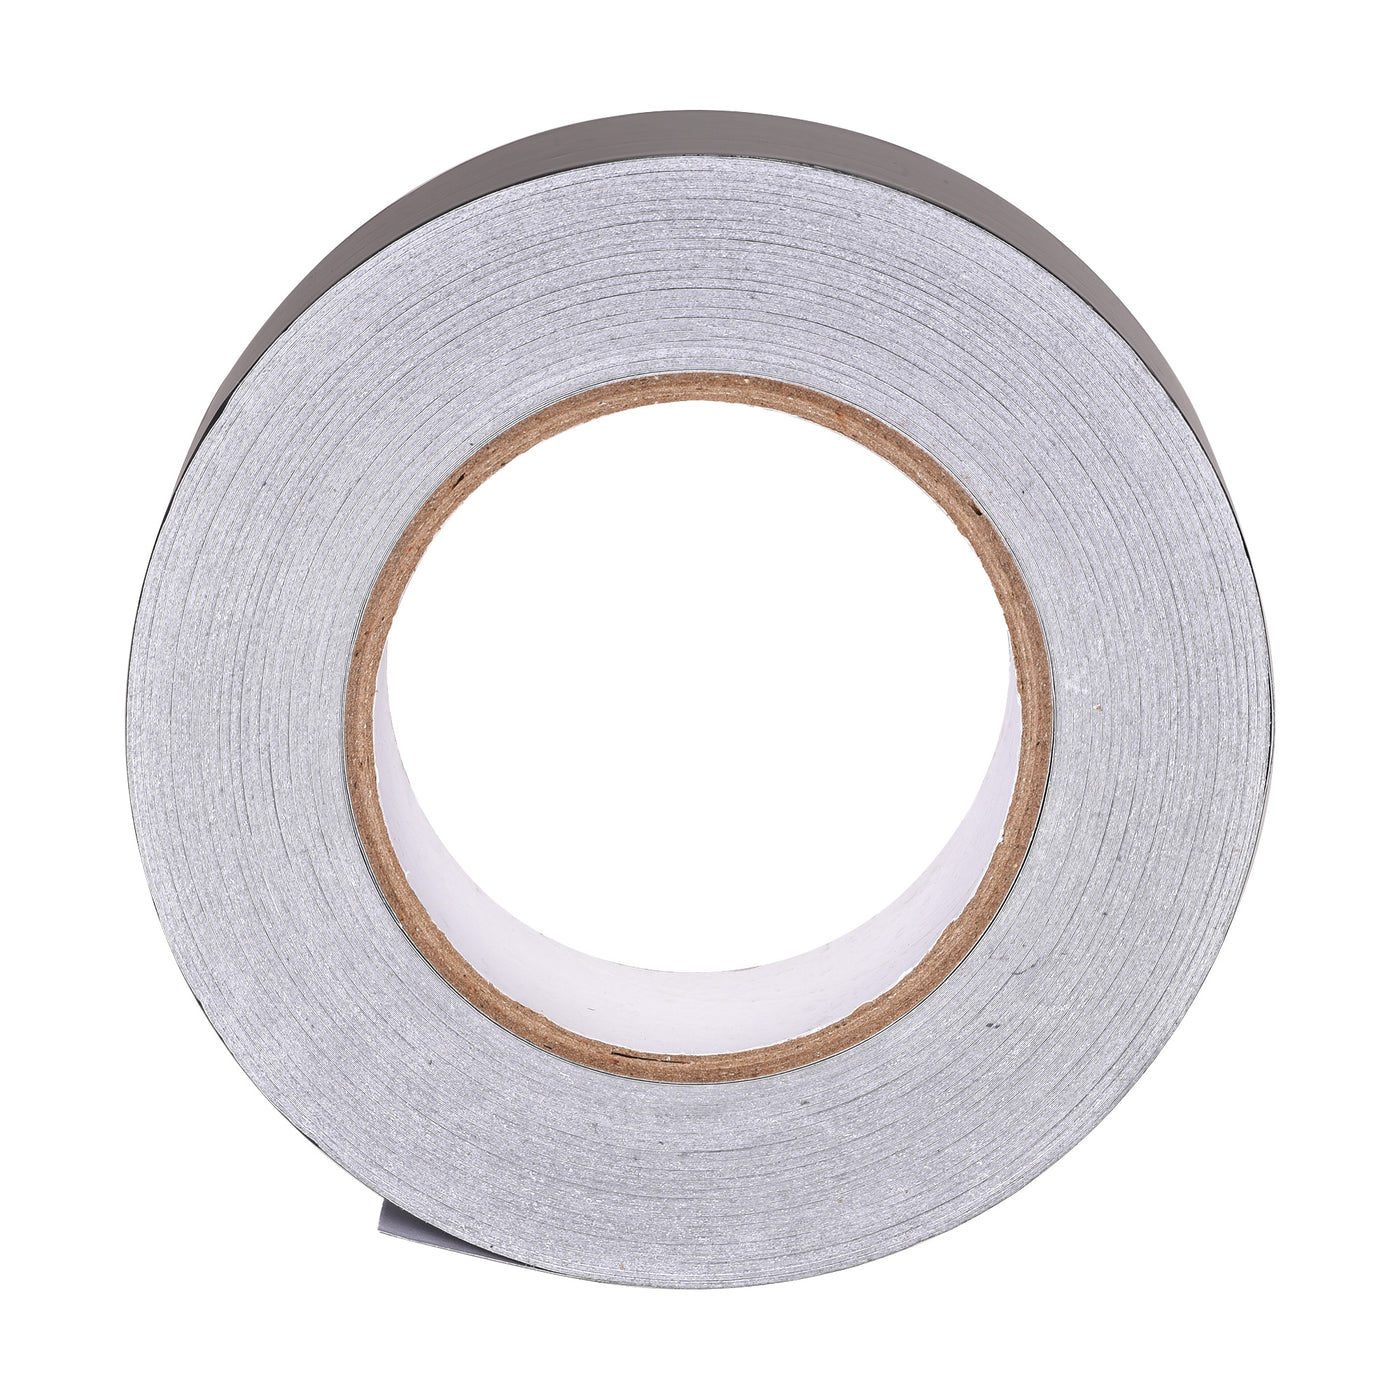 uxcell Uxcell 40mm Aluminum Foil Tape for HVAC, Patching Hot and Blocking light 50m/164ft